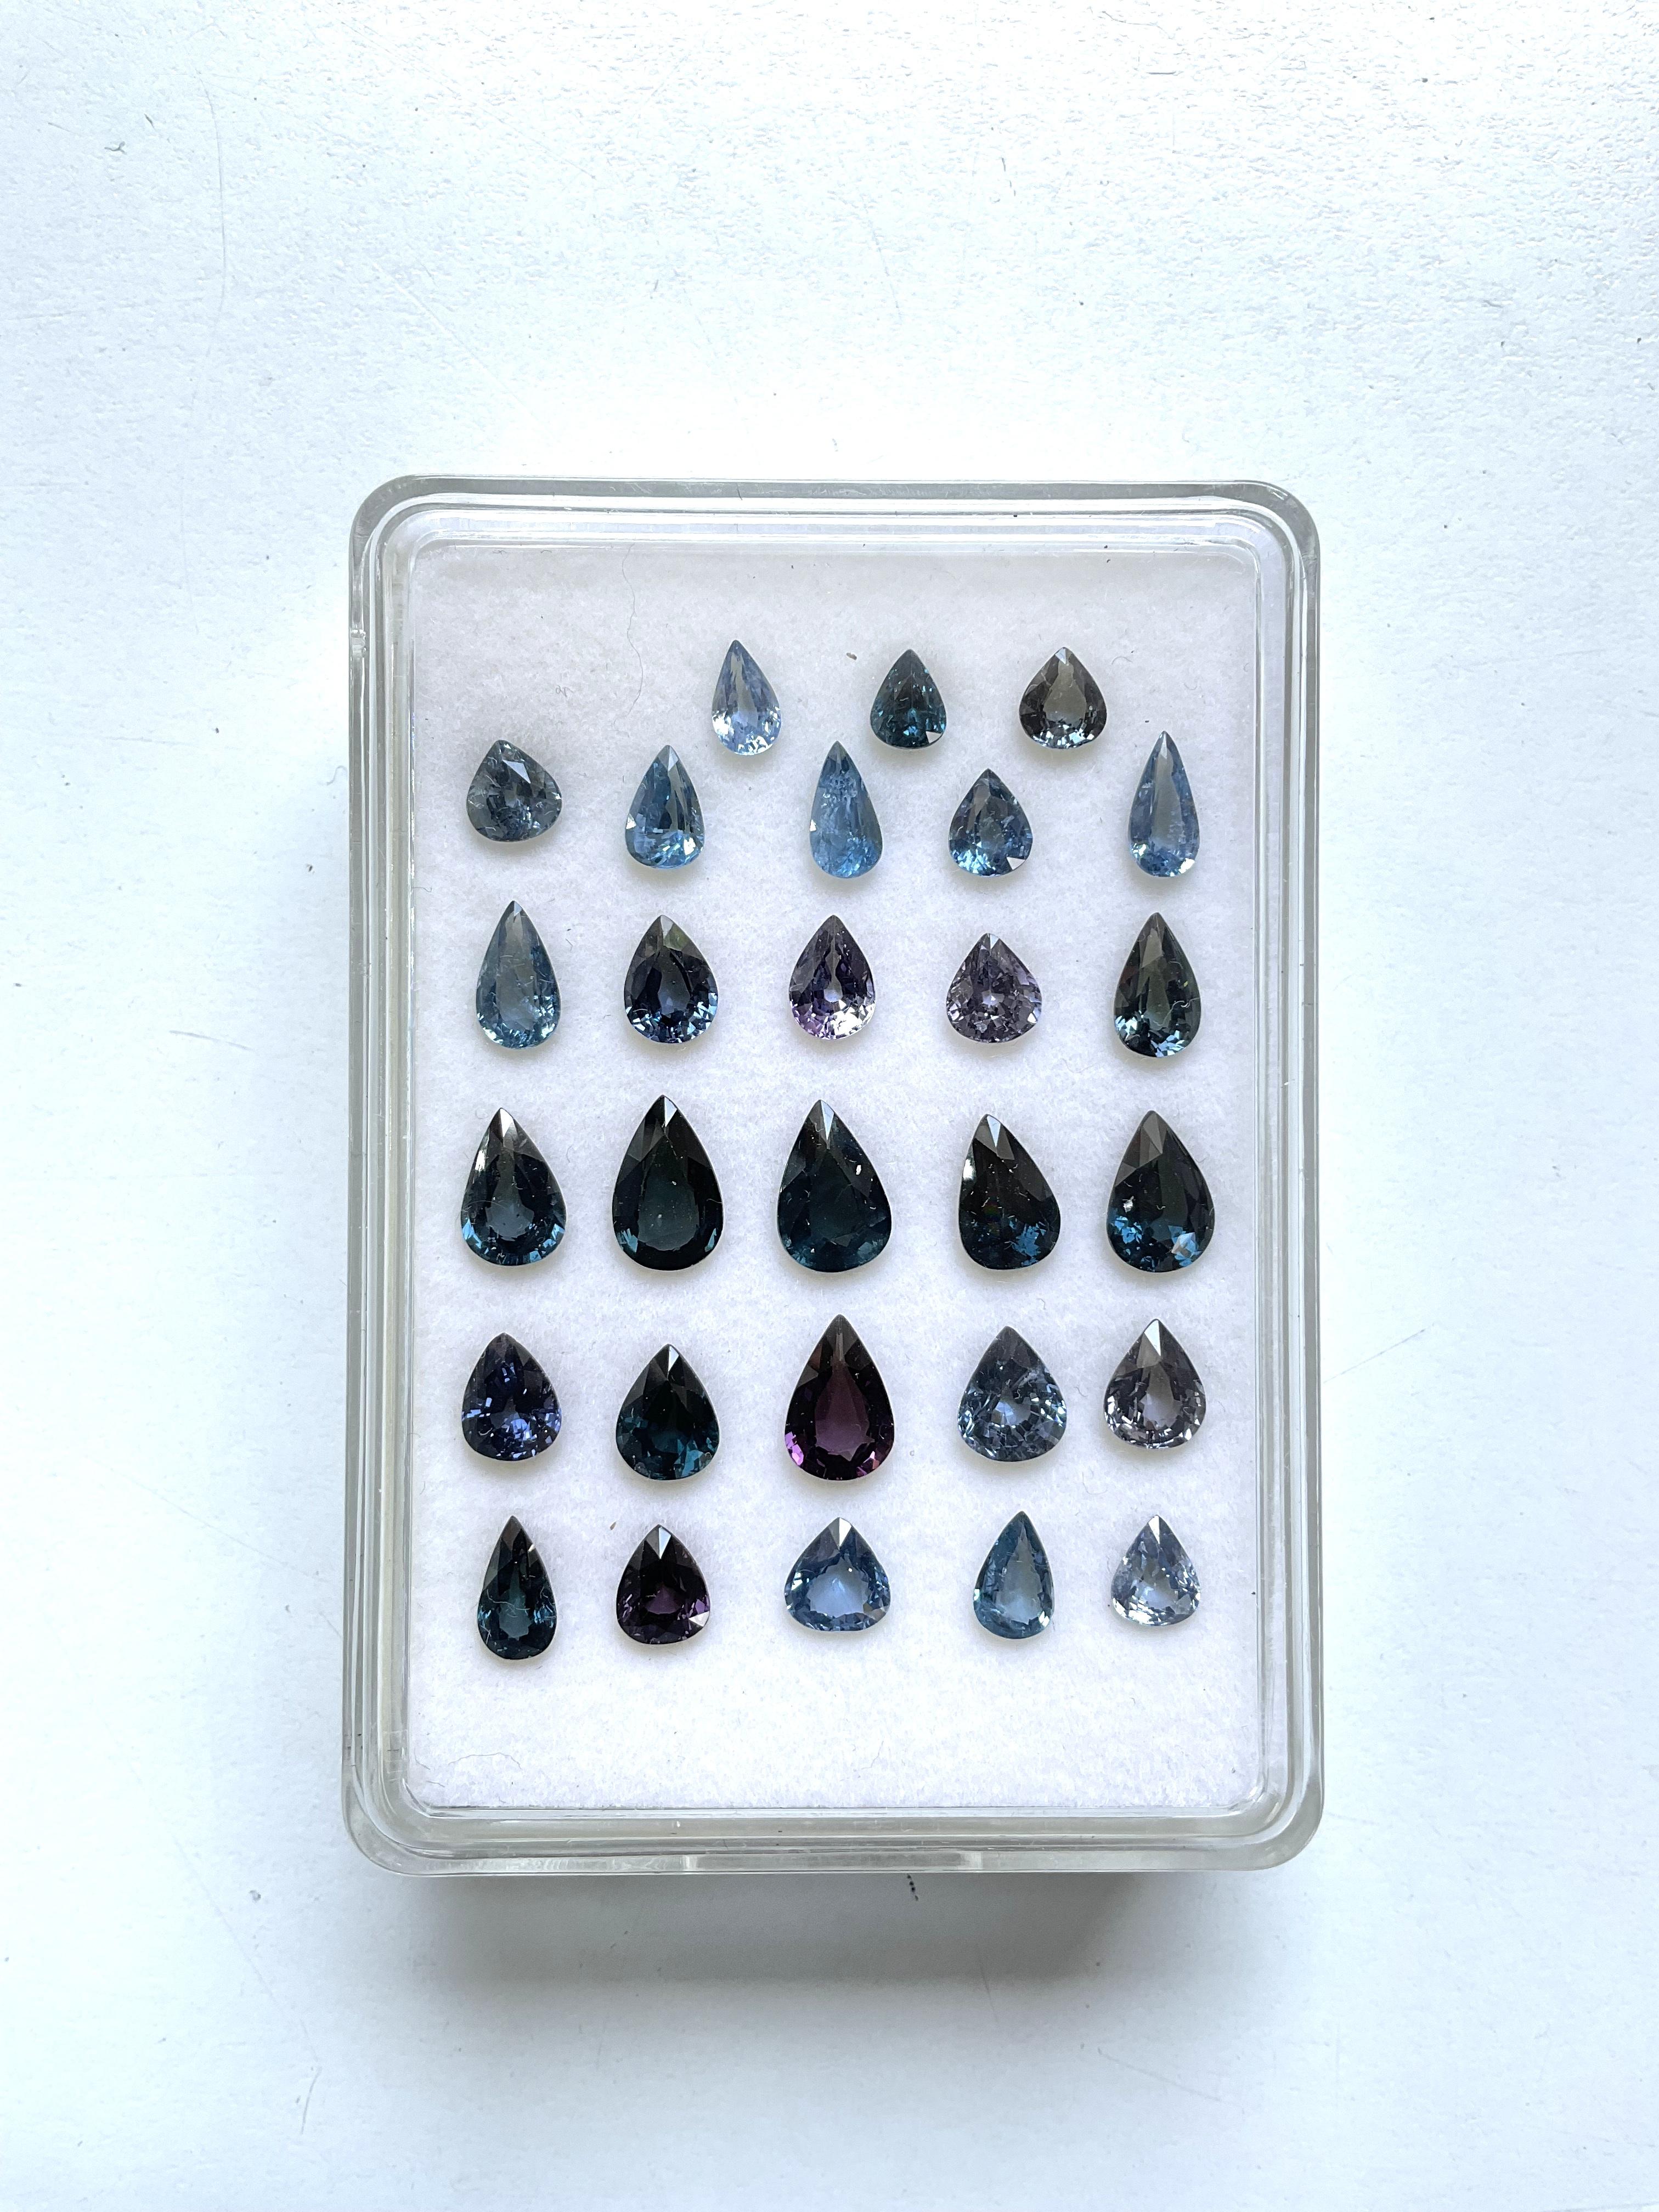 35.12 Carat Blue Spinel Tanzania Faceted Pear Cut stone For Jewelry Natural Gem en vente 2